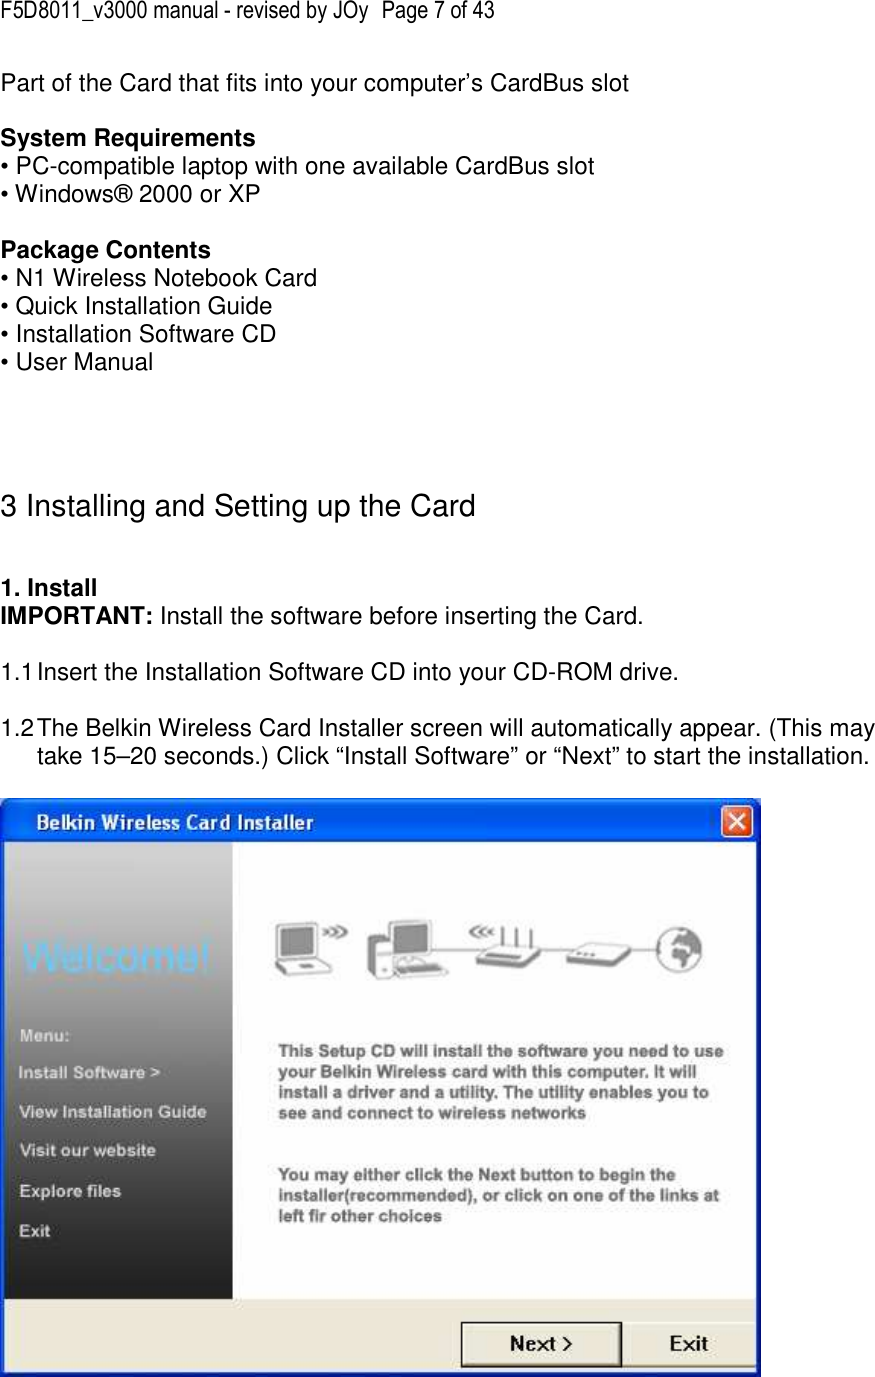 F5D8011_v3000 manual - revised by JOy  Page 7 of 43 Part of the Card that fits into your computer’s CardBus slot  System Requirements • PC-compatible laptop with one available CardBus slot • Windows® 2000 or XP  Package Contents • N1 Wireless Notebook Card • Quick Installation Guide • Installation Software CD • User Manual     3 Installing and Setting up the Card   1. Install  IMPORTANT: Install the software before inserting the Card.  1.1 Insert the Installation Software CD into your CD-ROM drive.  1.2 The Belkin Wireless Card Installer screen will automatically appear. (This may take 15–20 seconds.) Click “Install Software” or “Next” to start the installation.    